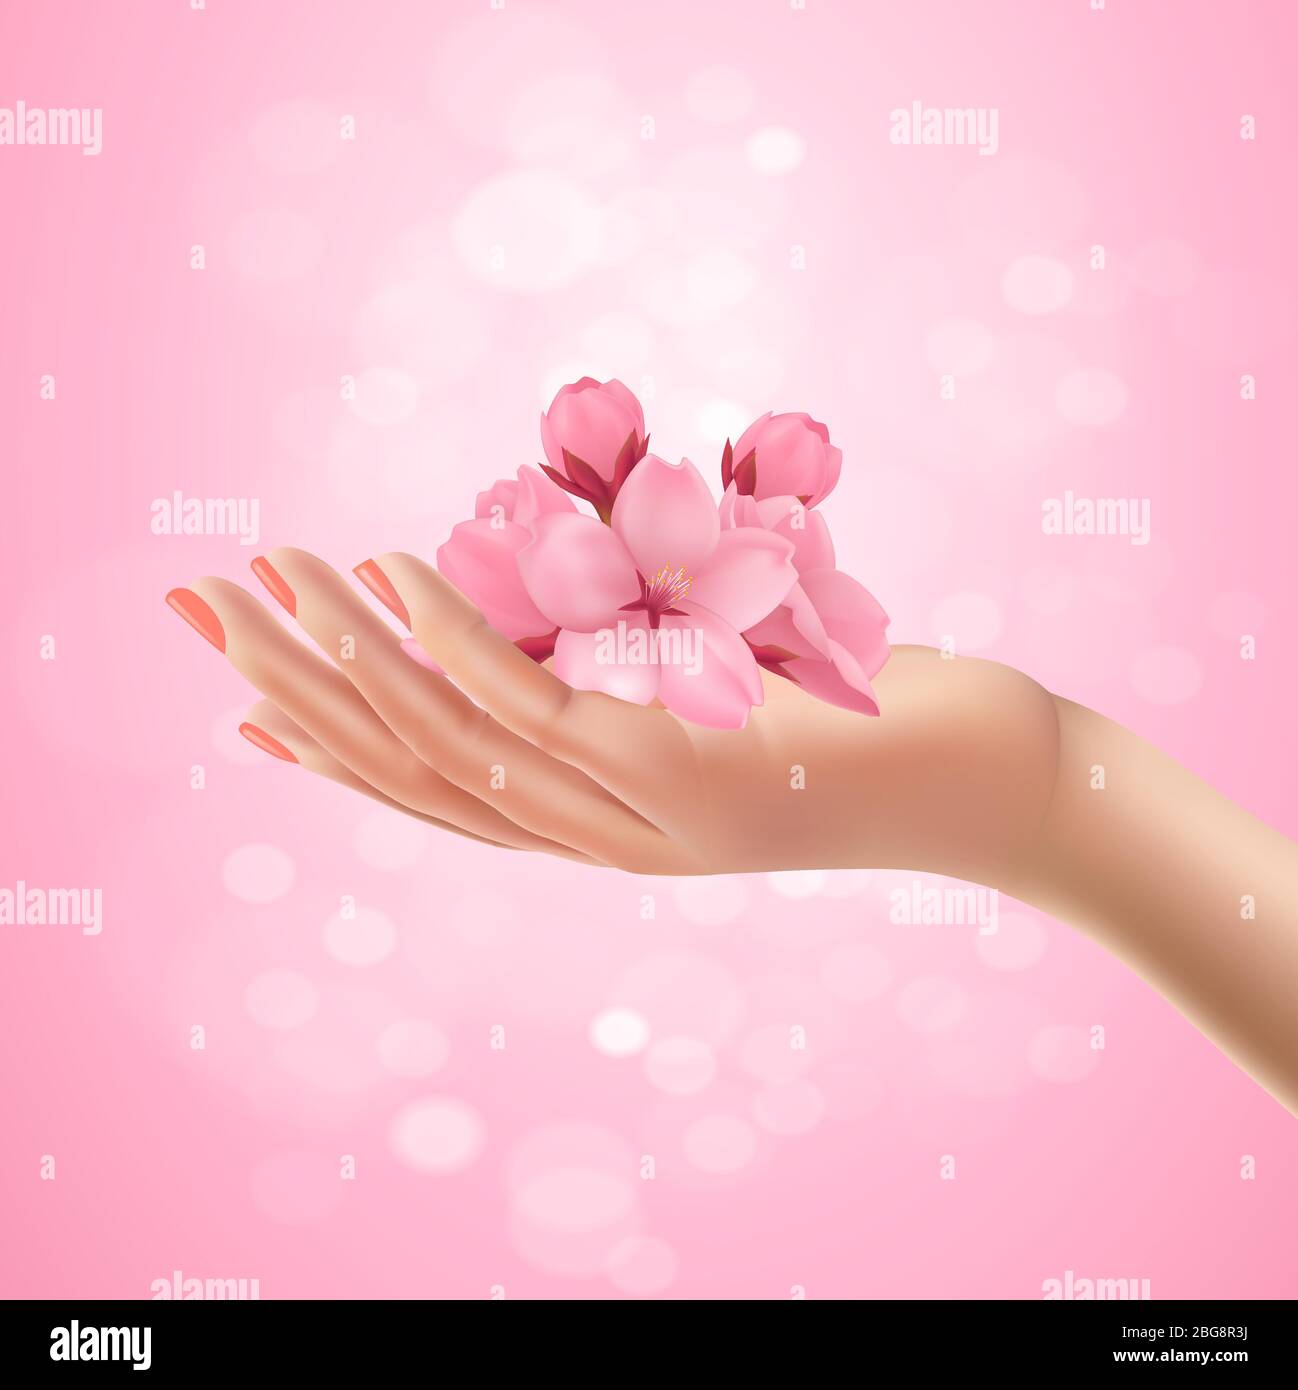 Realistic female hand holding sakura flower. 3d rendering. Blurred abstract background in soft pastel colors. Spring cherry blooming flowers. Design for natural cosmetics, perfume, women products. Stock Vector